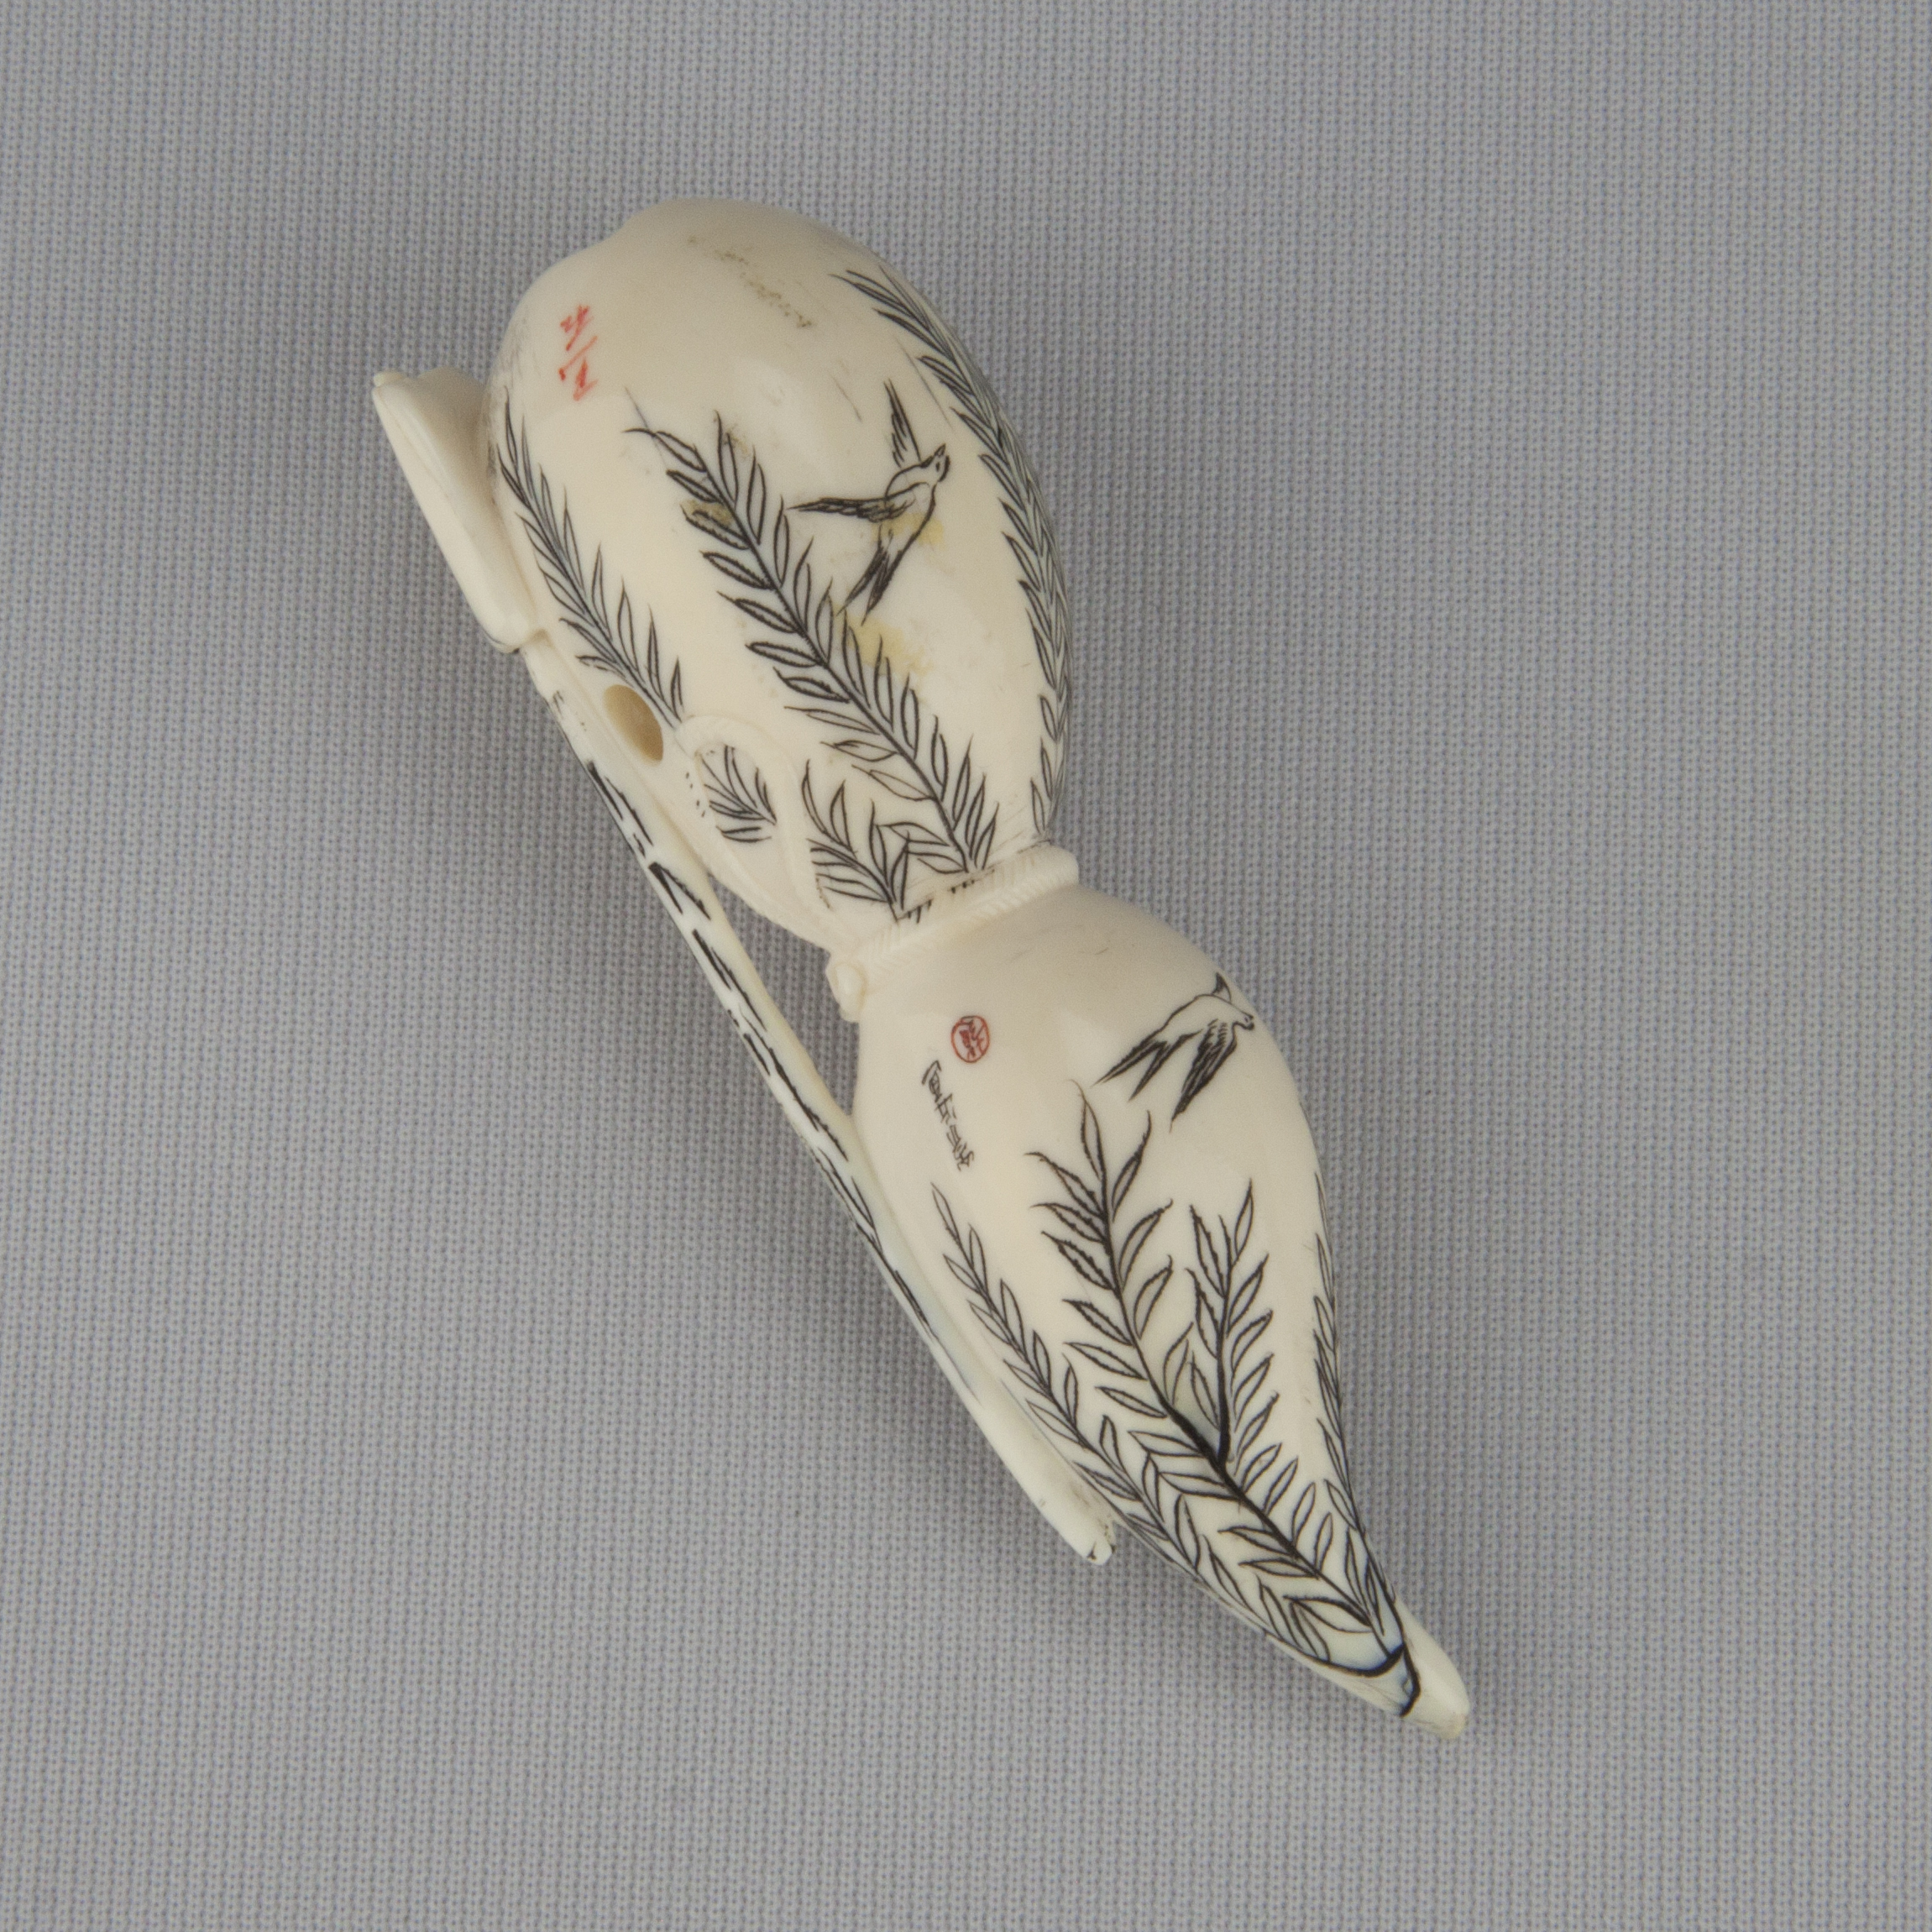 Netsuke depicting a double gourd with stained black designs of willows and birds, ca. 18th–19th century Ivory Gift of Mr. and Mrs. Nathaniel I. Grey 1988.126